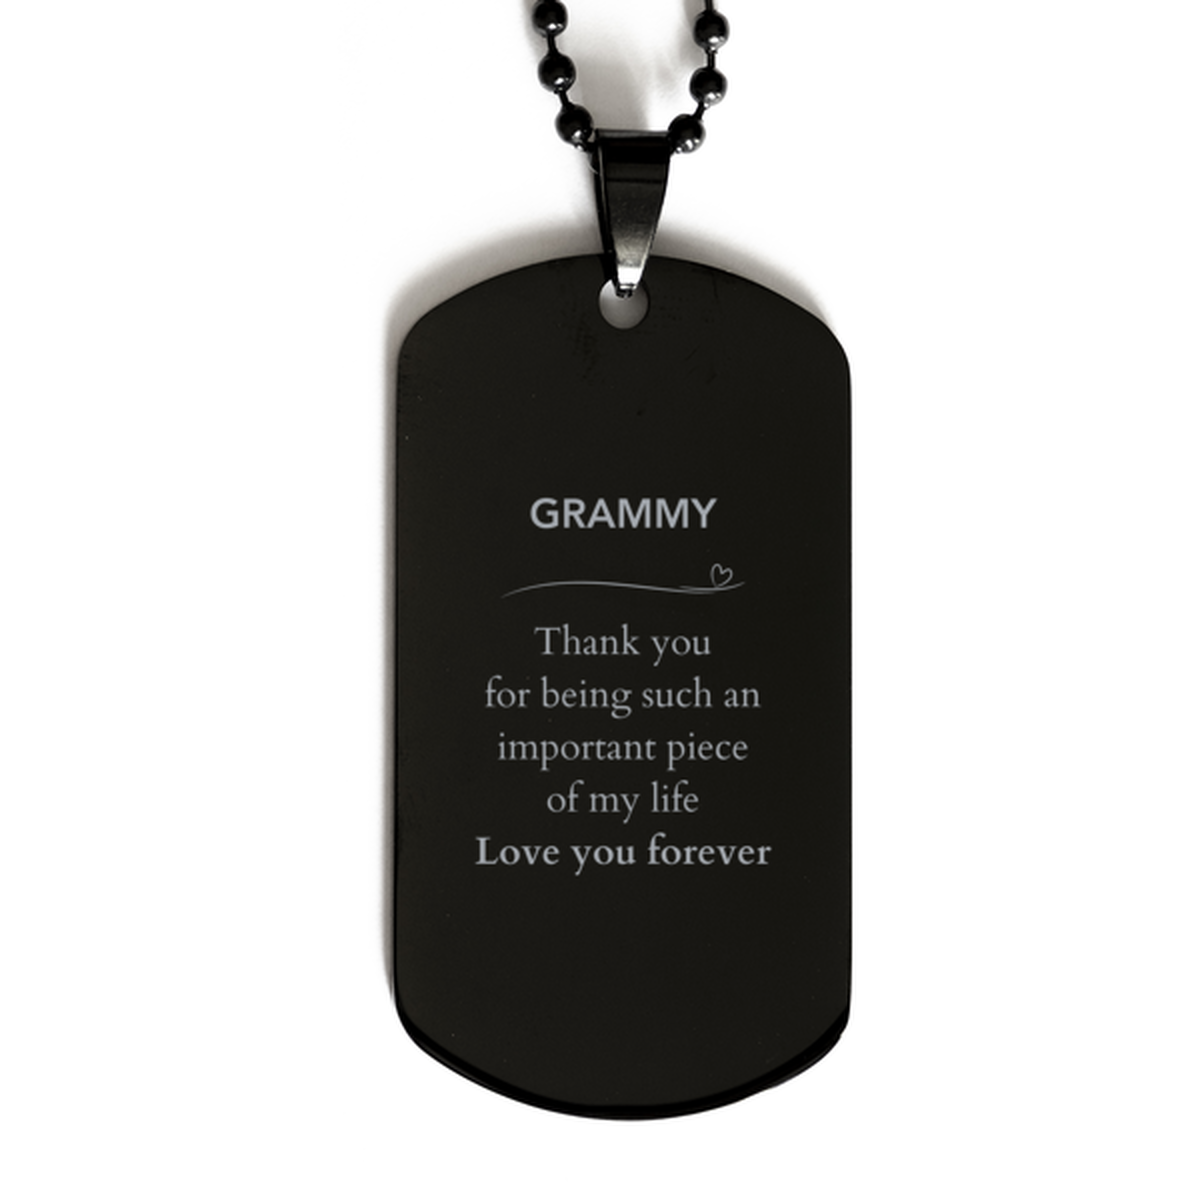 Appropriate Grammy Black Dog Tag Epic Birthday Gifts for Grammy Thank you for being such an important piece of my life Grammy Christmas Mothers Fathers Day